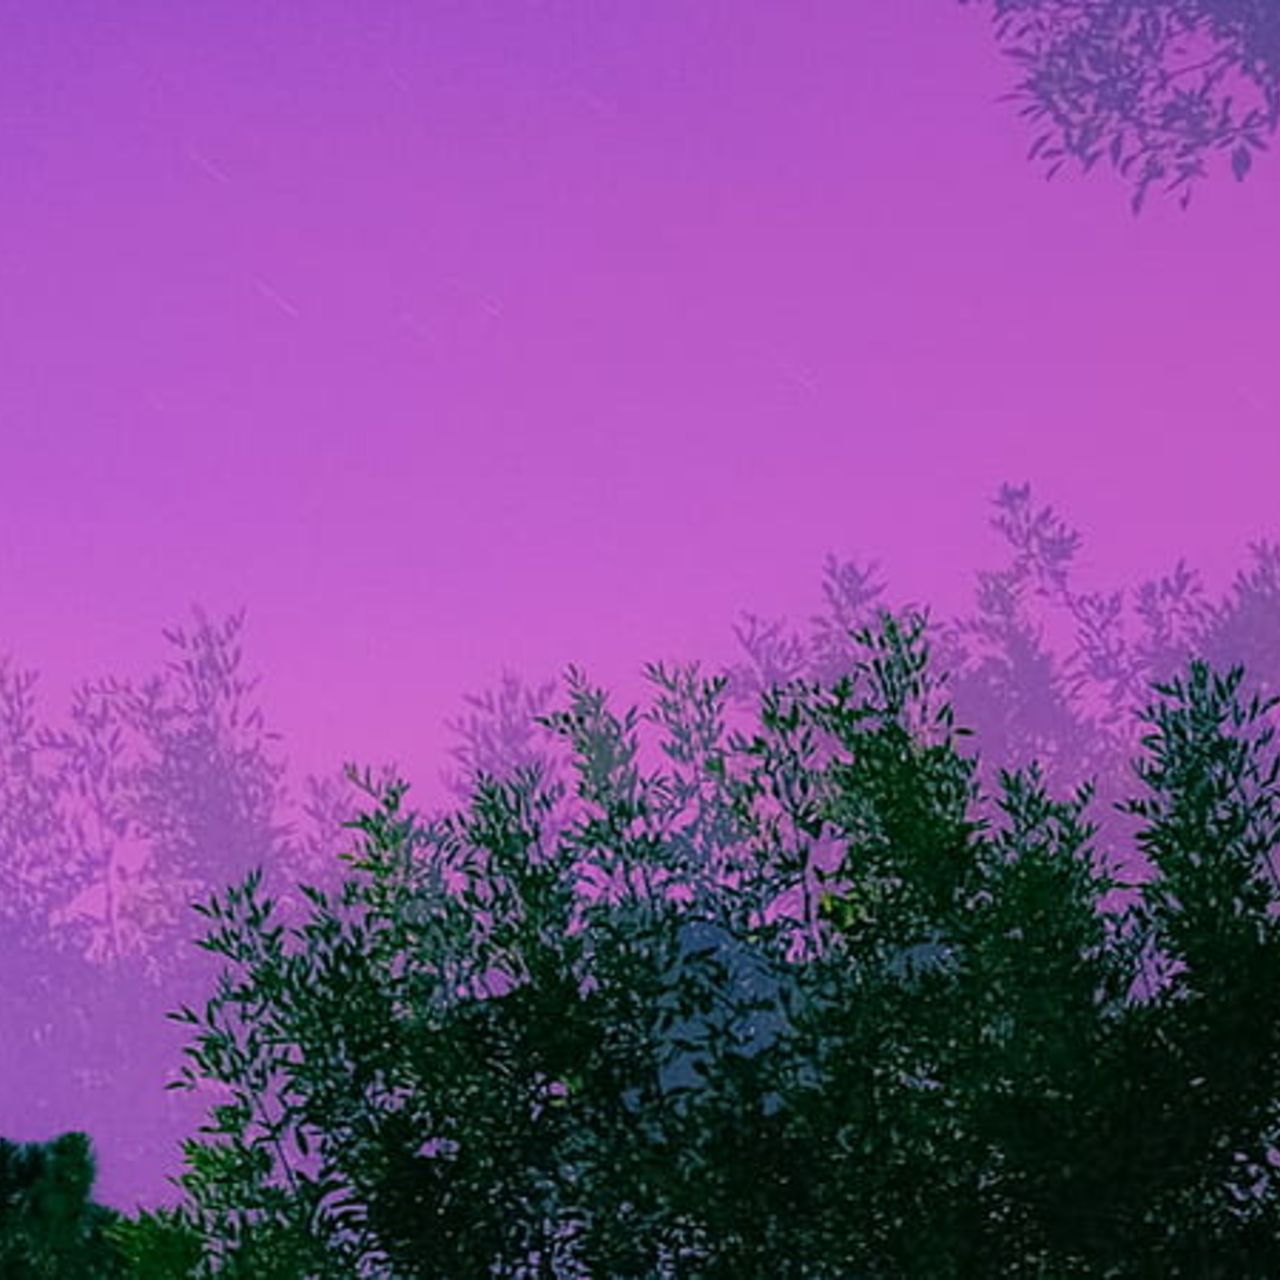 A purple sky with trees in the foreground. - Light purple